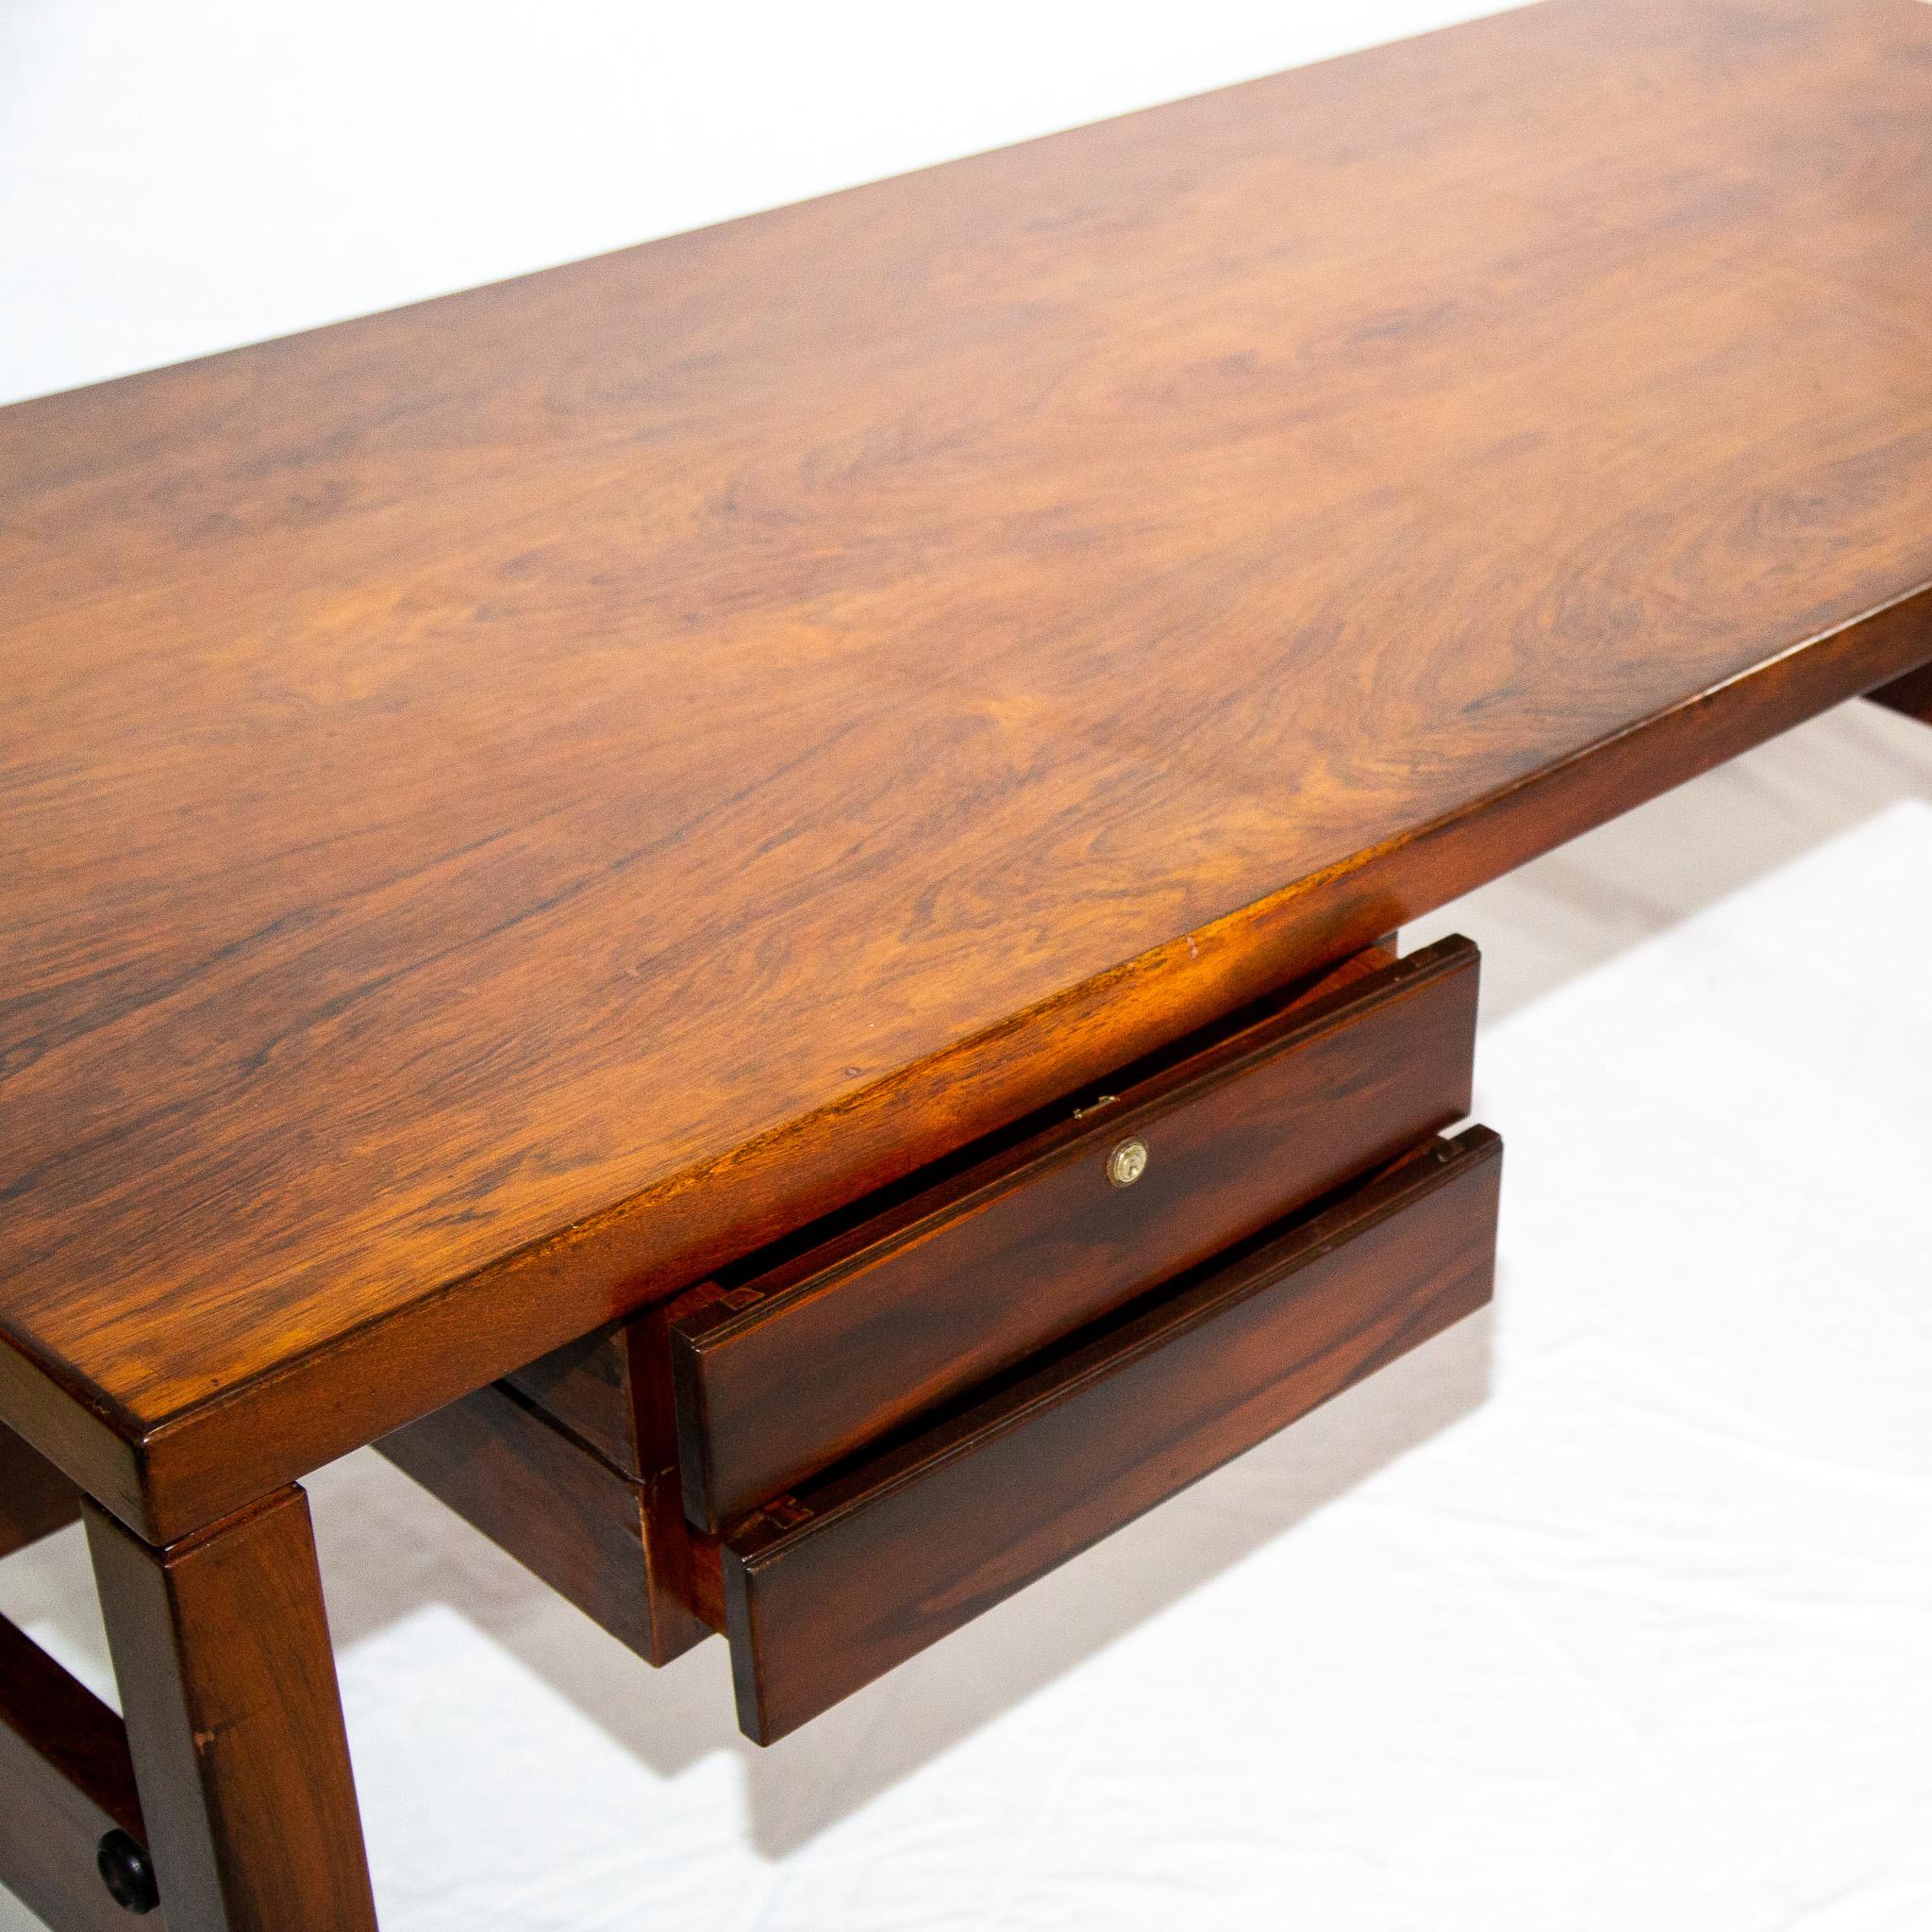 Brazilian Modern Desk in Hardwood with Floating Drawers, Sergio Rodrigues, 1960s For Sale 7